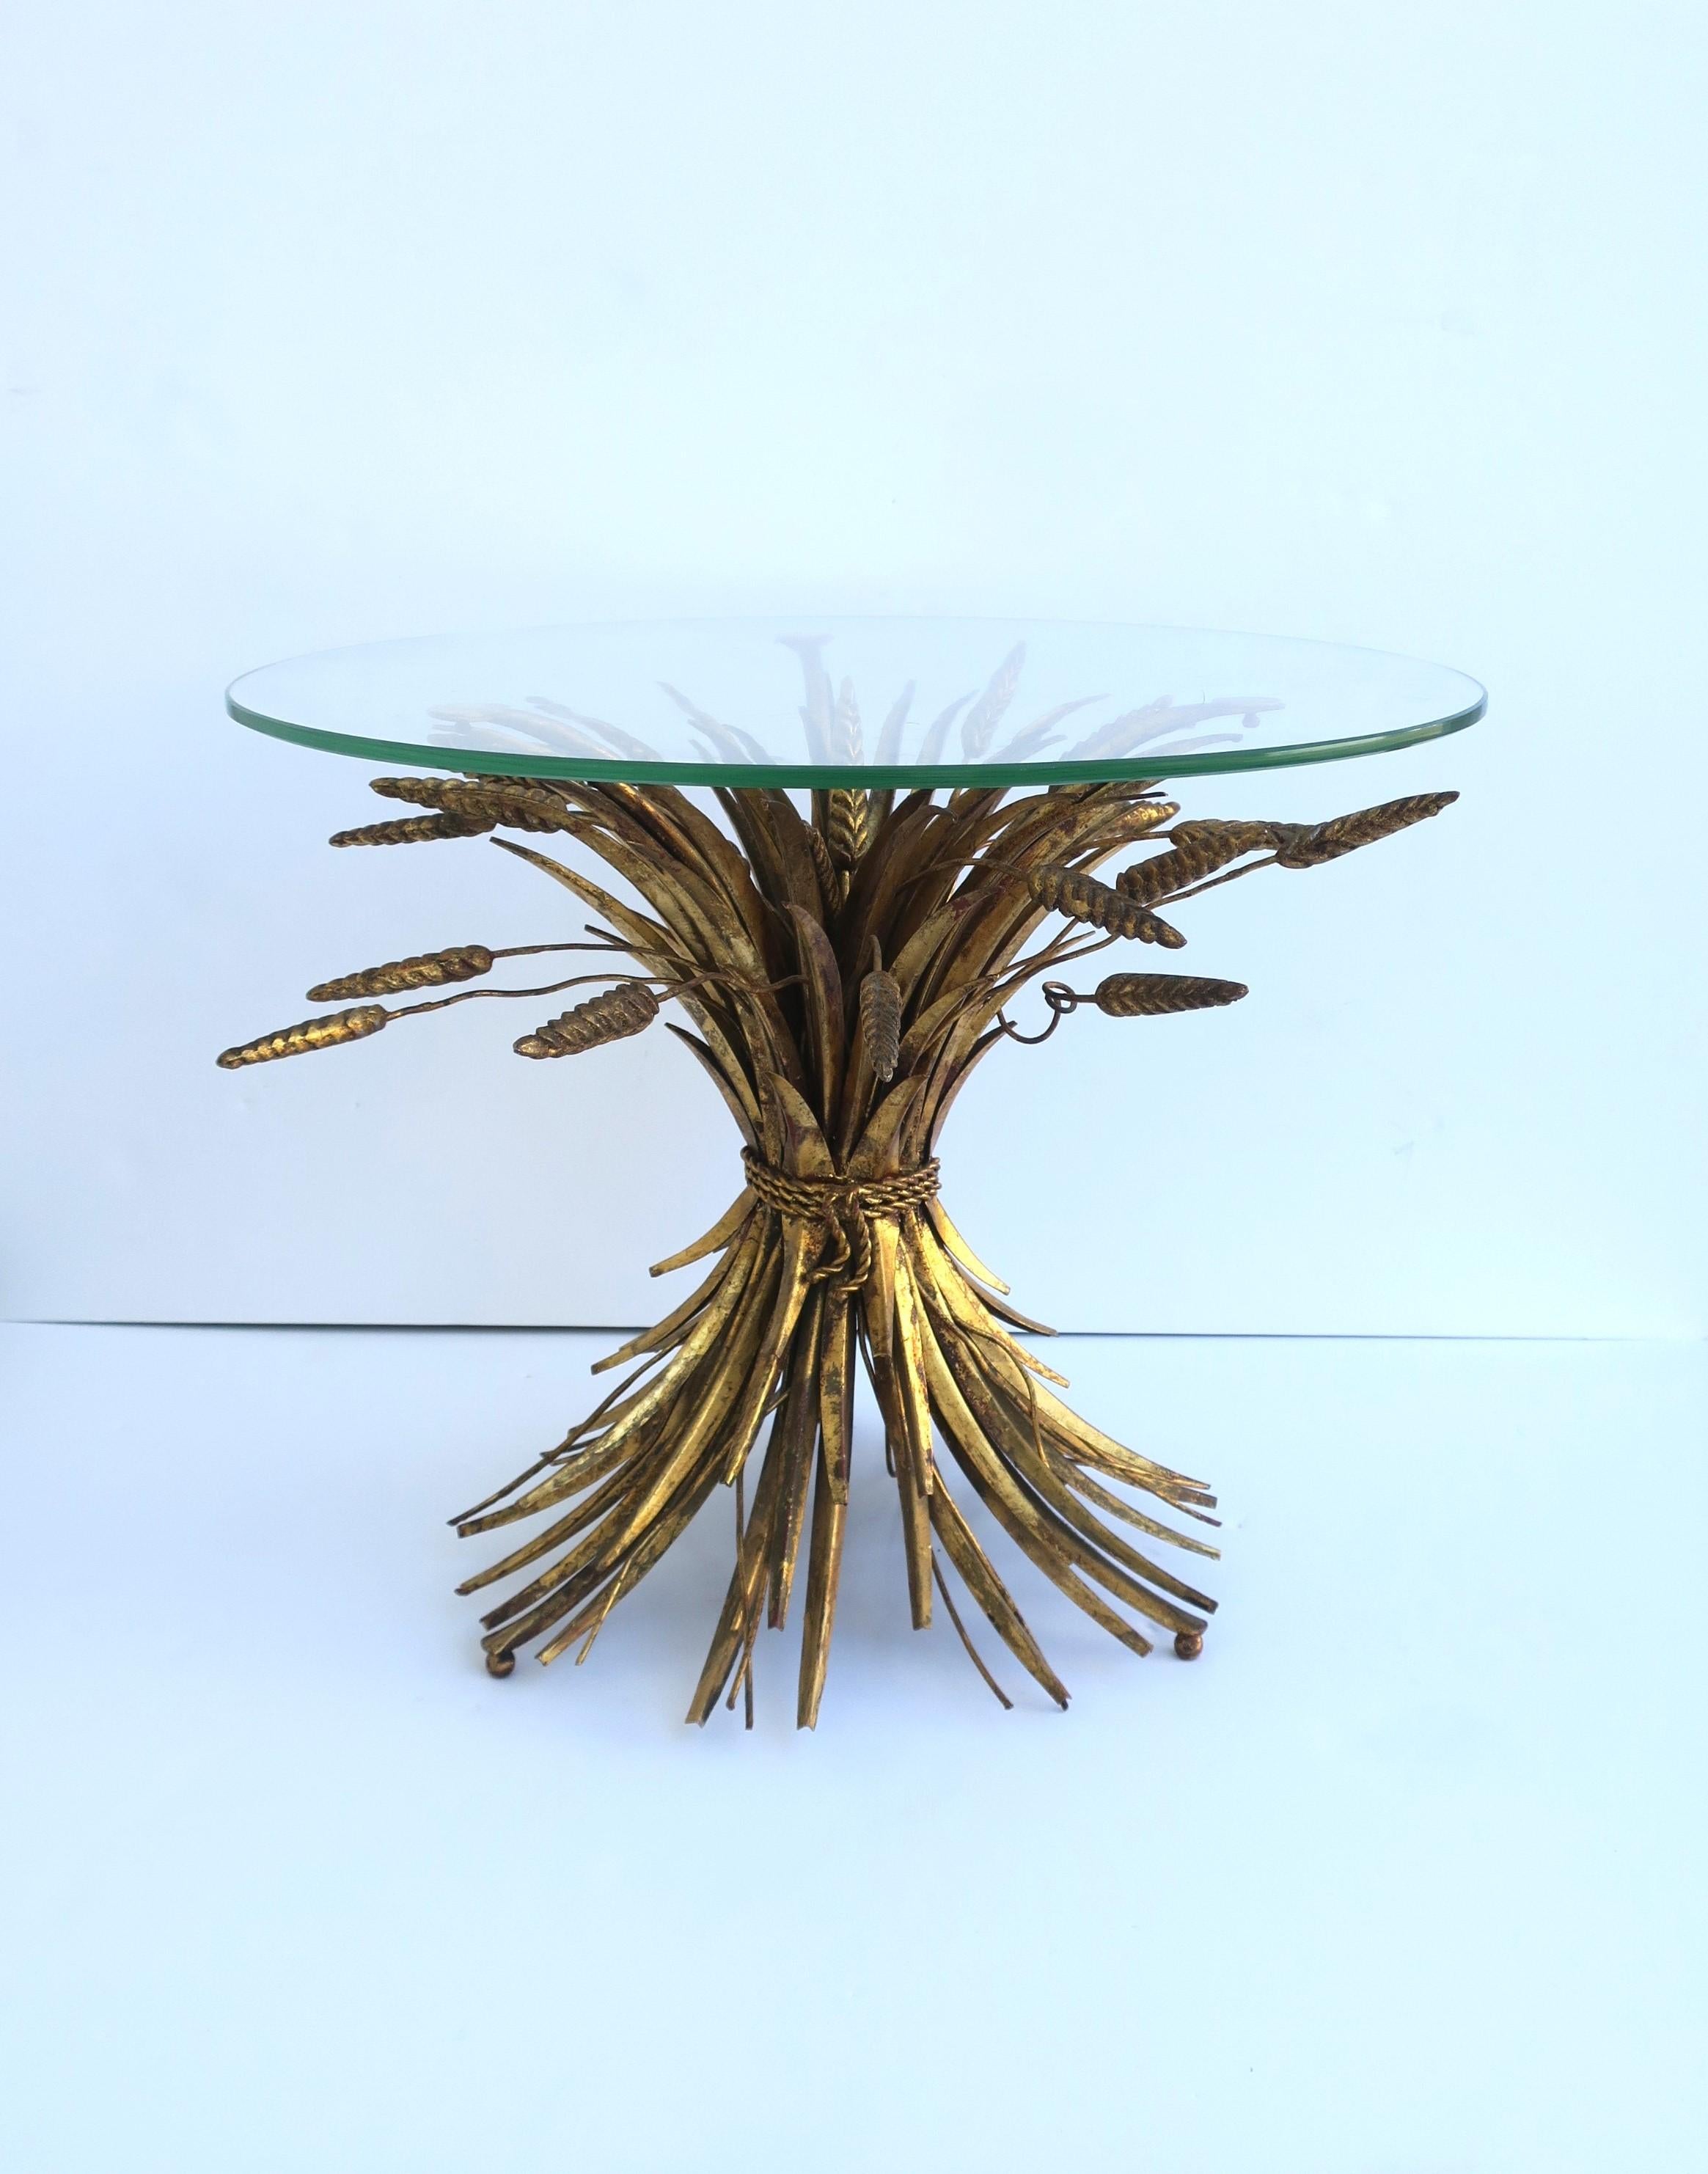 A beautiful Italian gold gilt metal Sheaf of Wheat end, side or drinks table, Hollywood Regency style, circa mid-20th century or earlier, Italy. Piece has gold gilt metal 'Sheaf-of-Wheat' base, finished with a round glass top. Table is aka the 'Coco